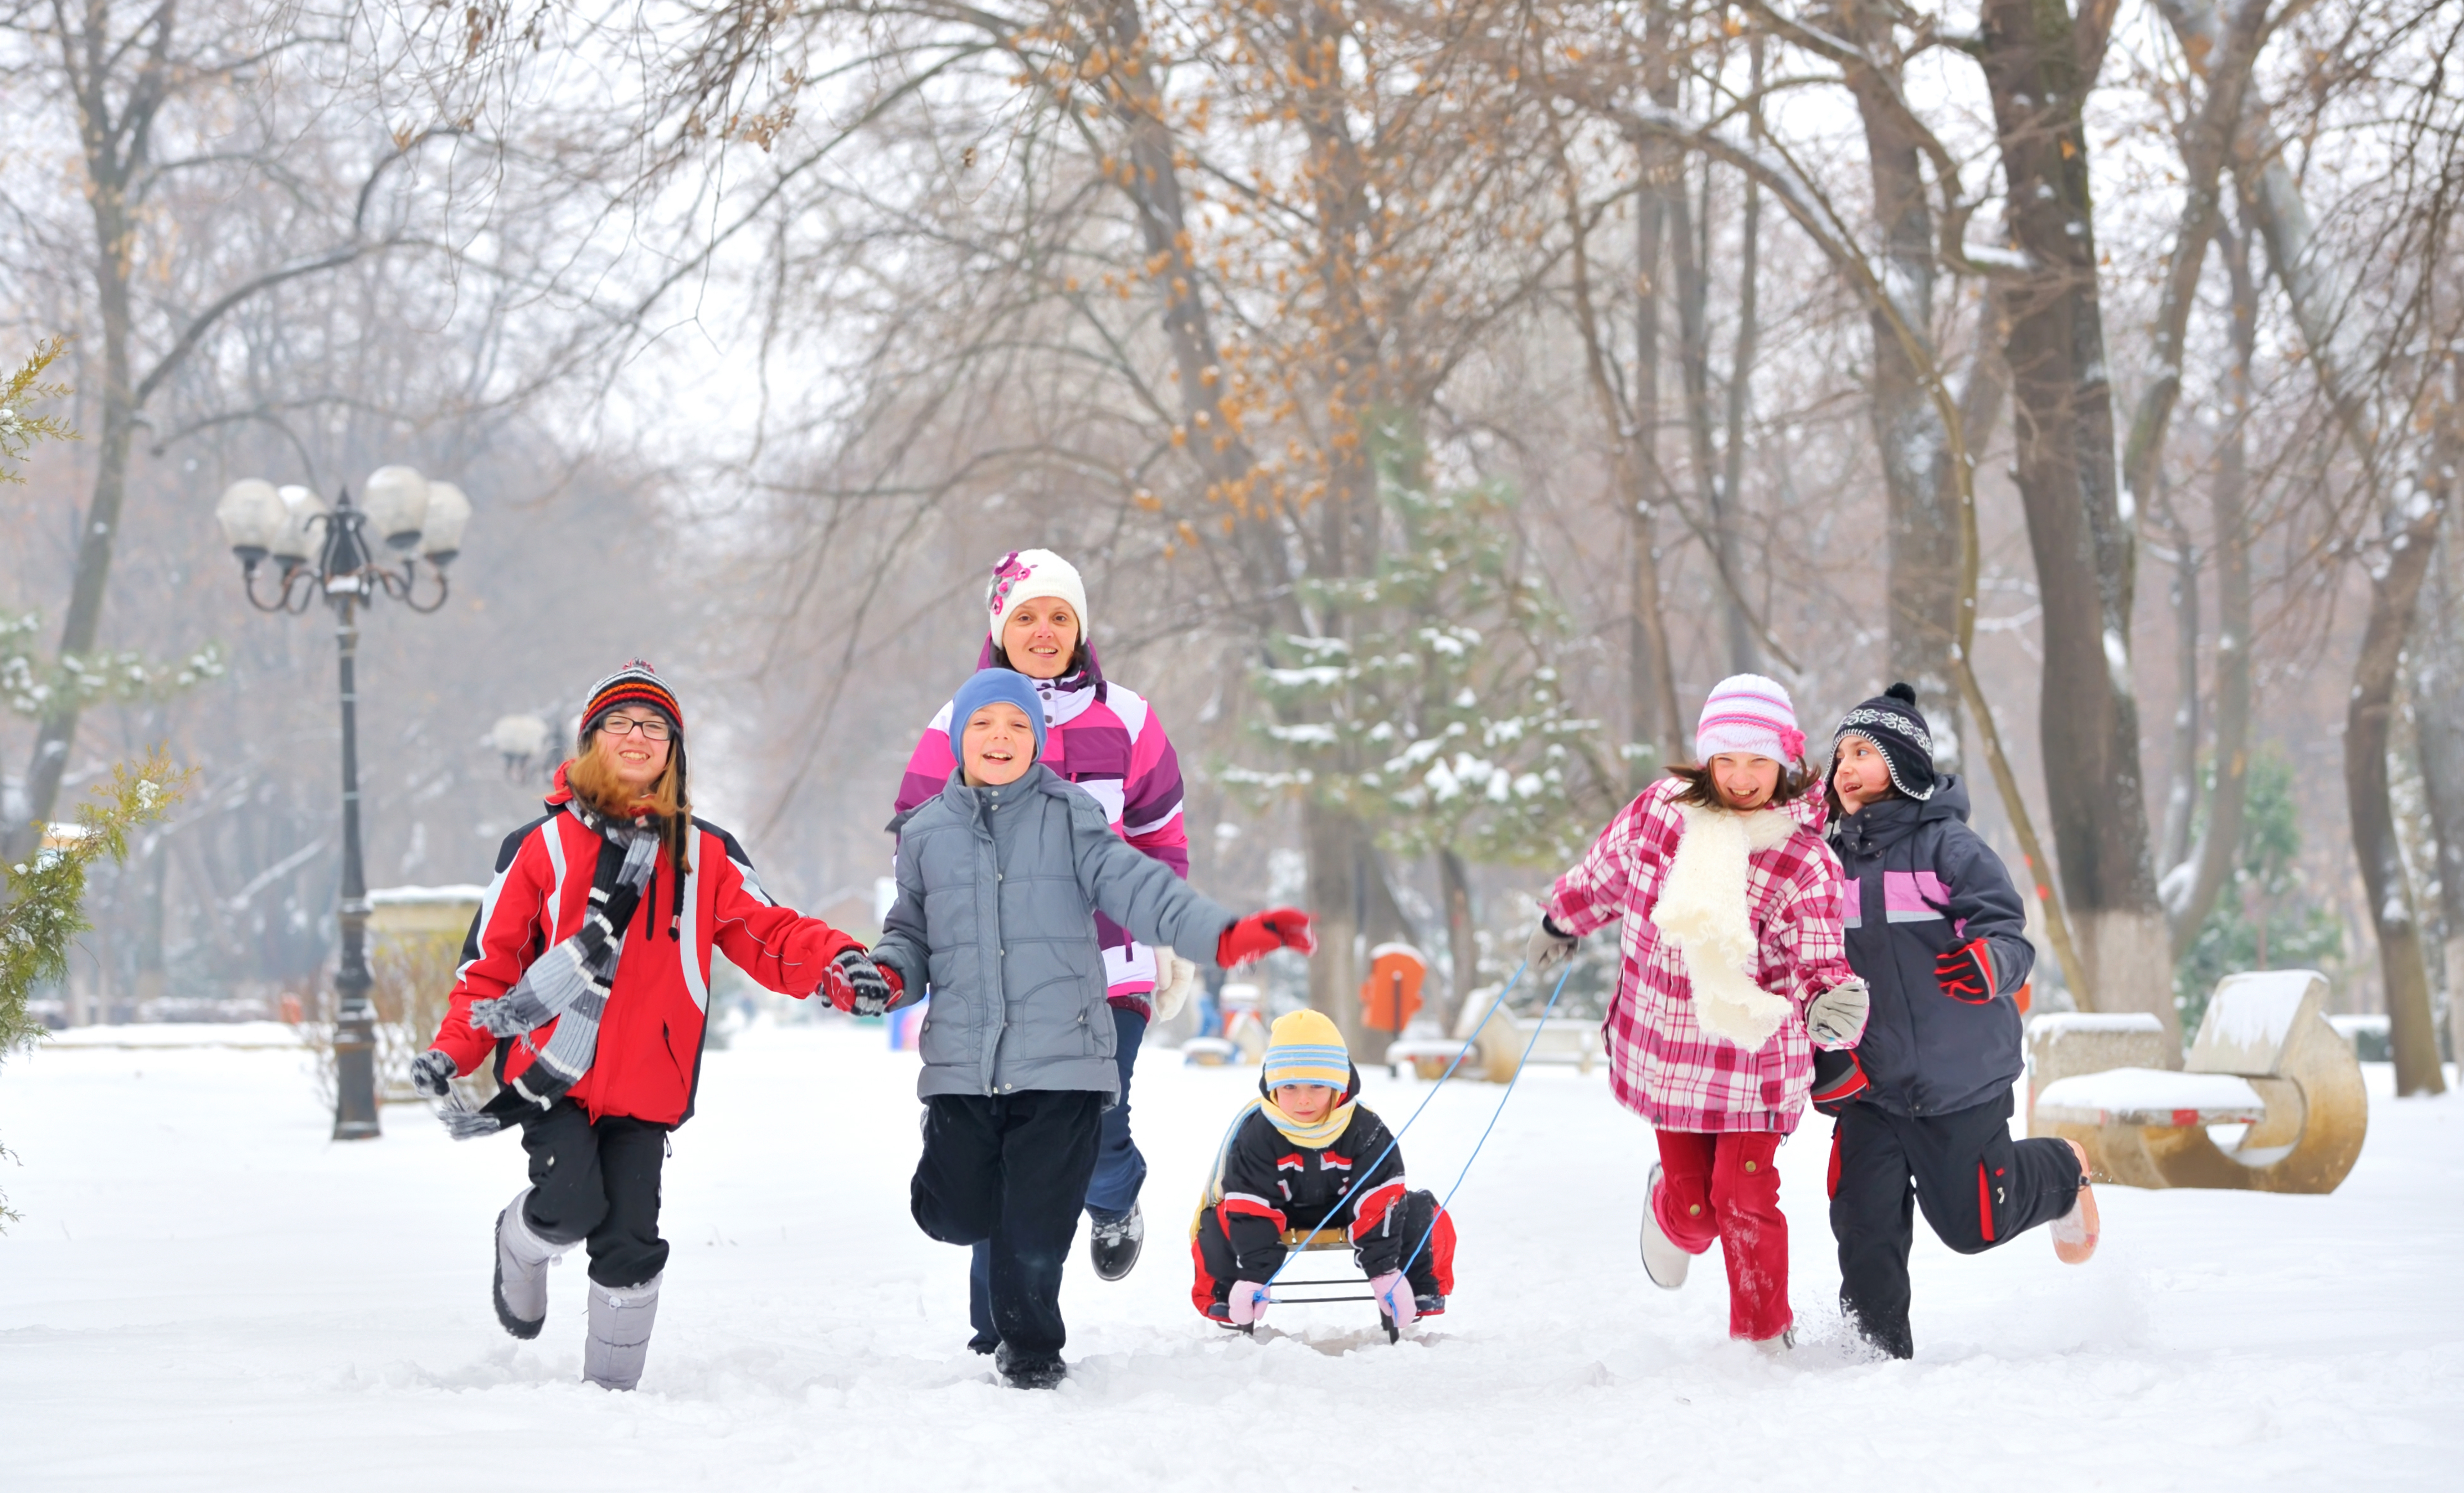 Children playing in a snowy park.